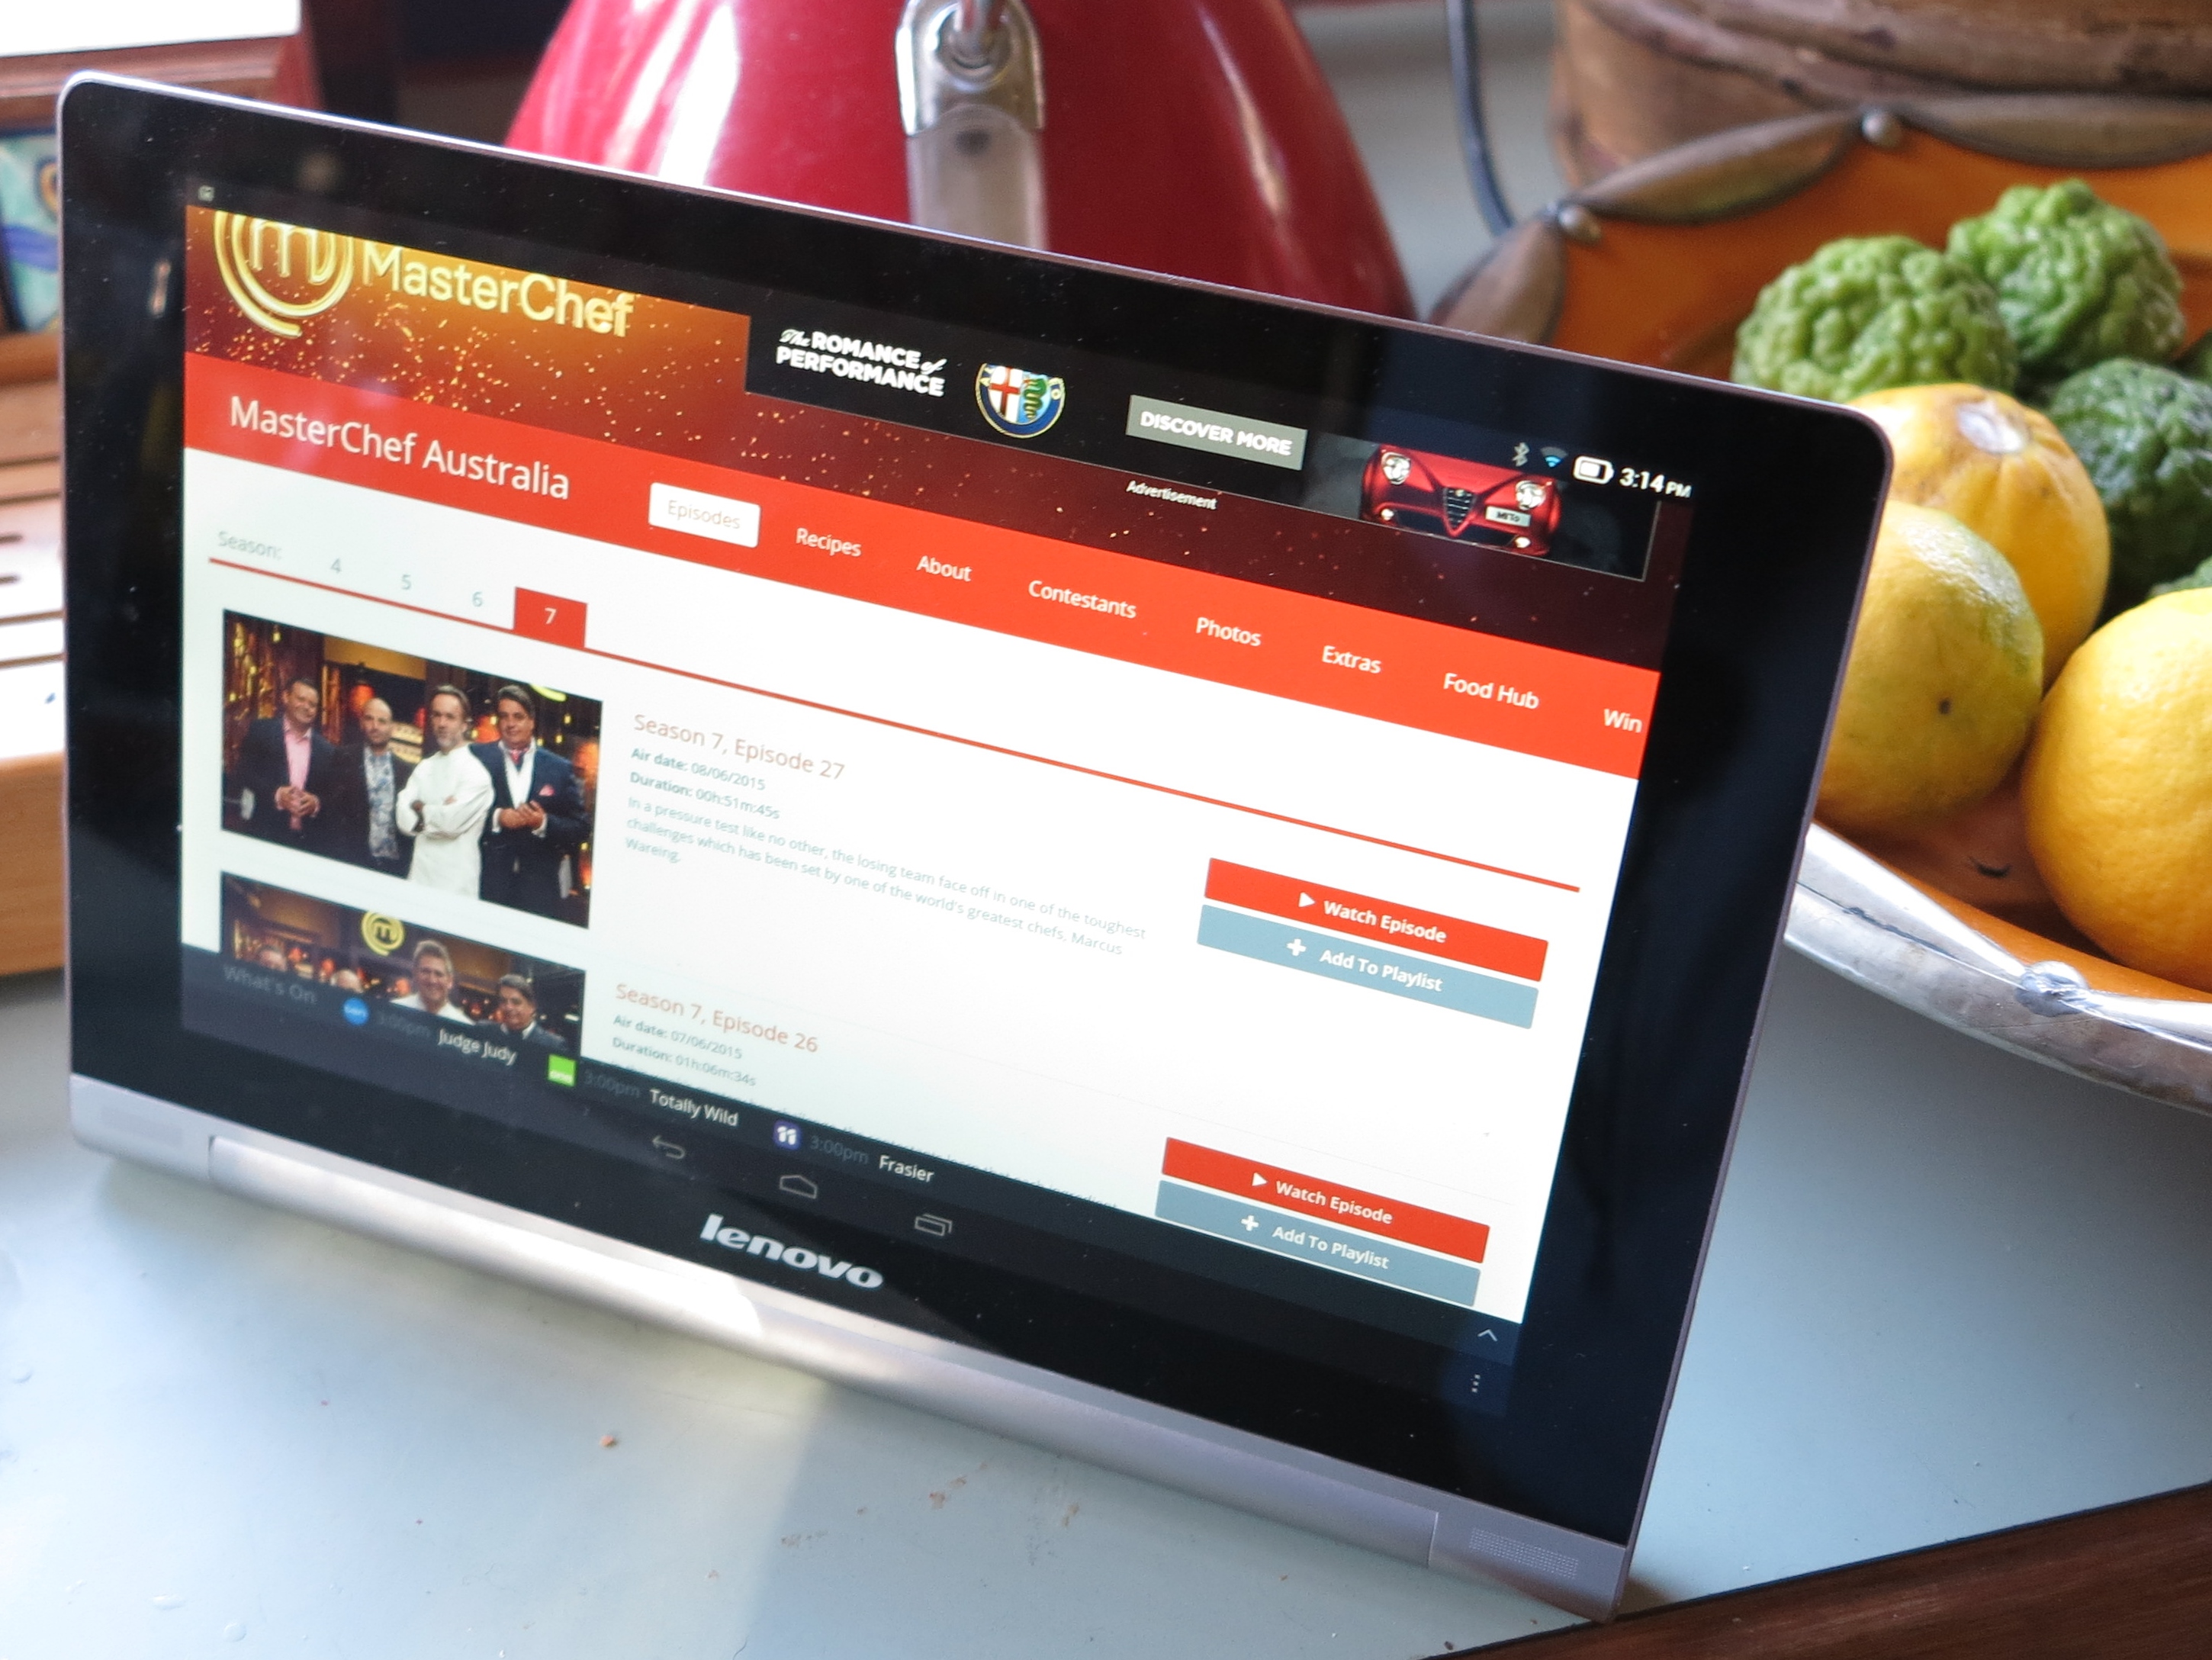 Freeview now aggregates Australian FTA TV Internet streams in a mobile app